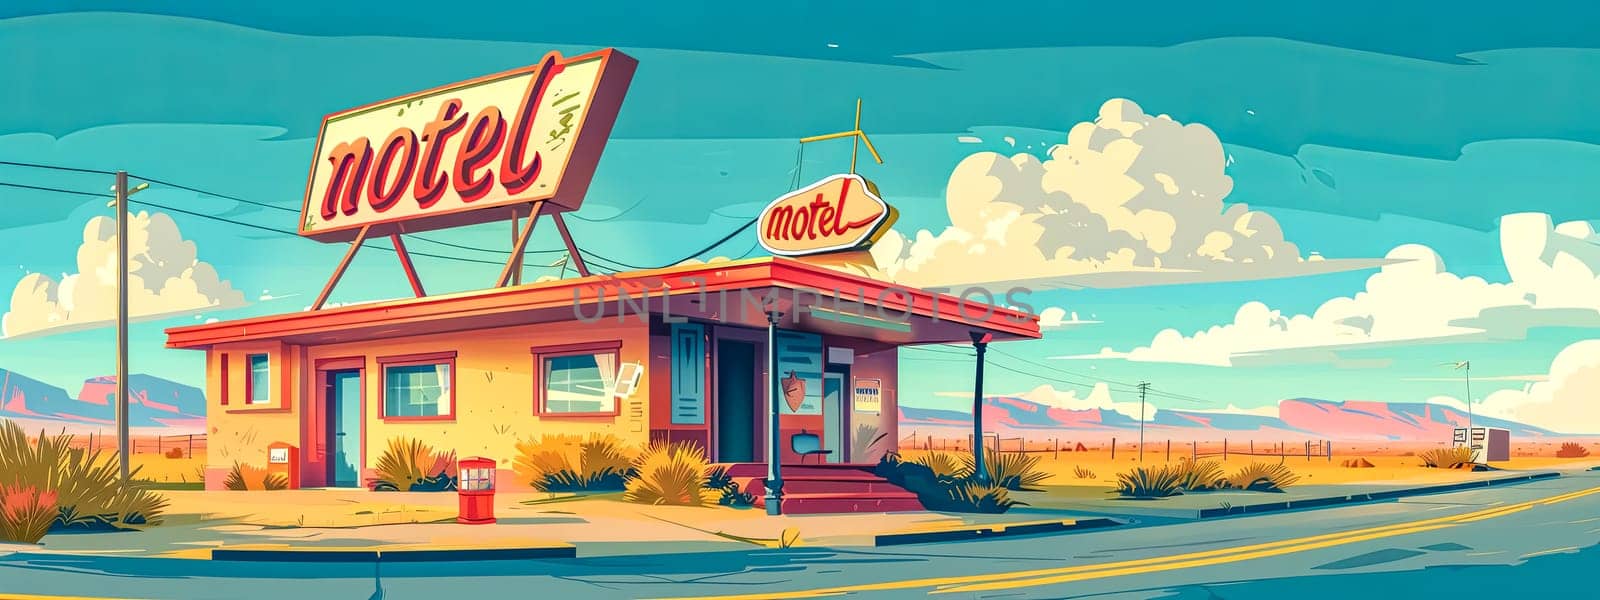 Colorful illustration of a classic roadside motel in a deserted landscape with vibrant sky by Edophoto